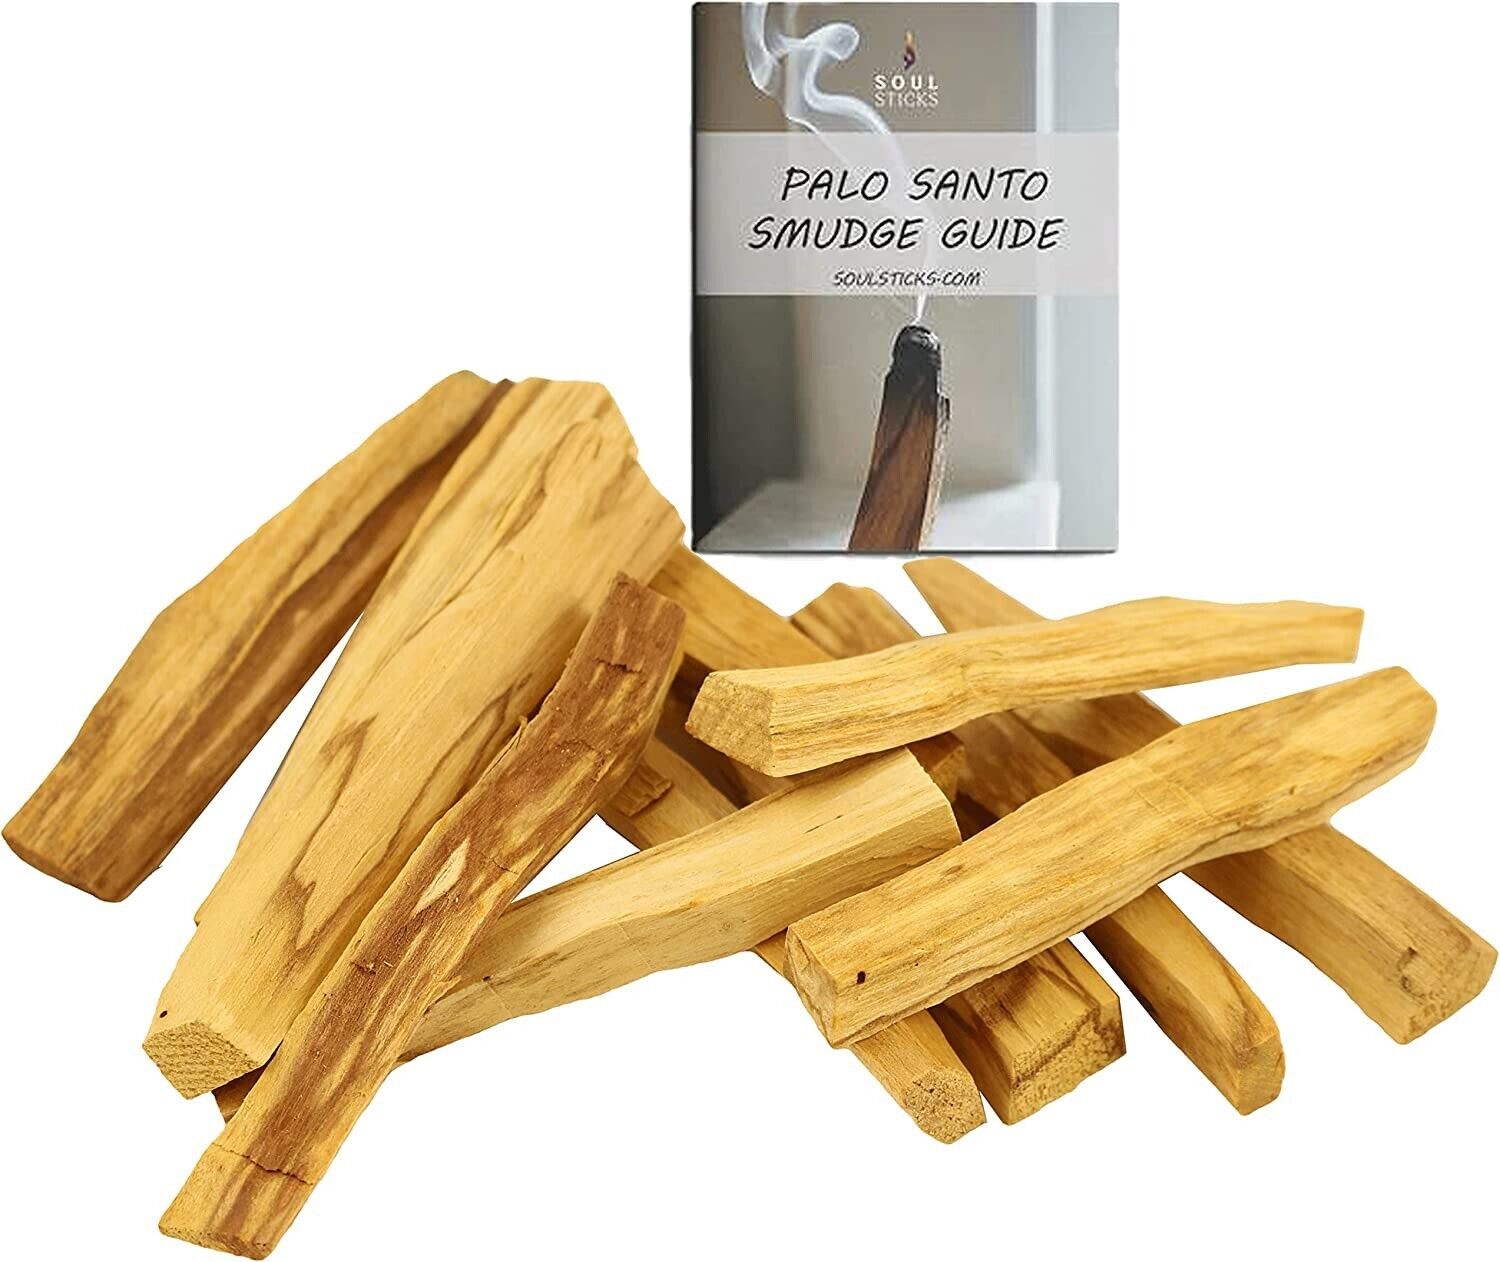 12 Pieces Palo Santo Sticks Holy Wood Incense For Smudging Cleansing & Blessing